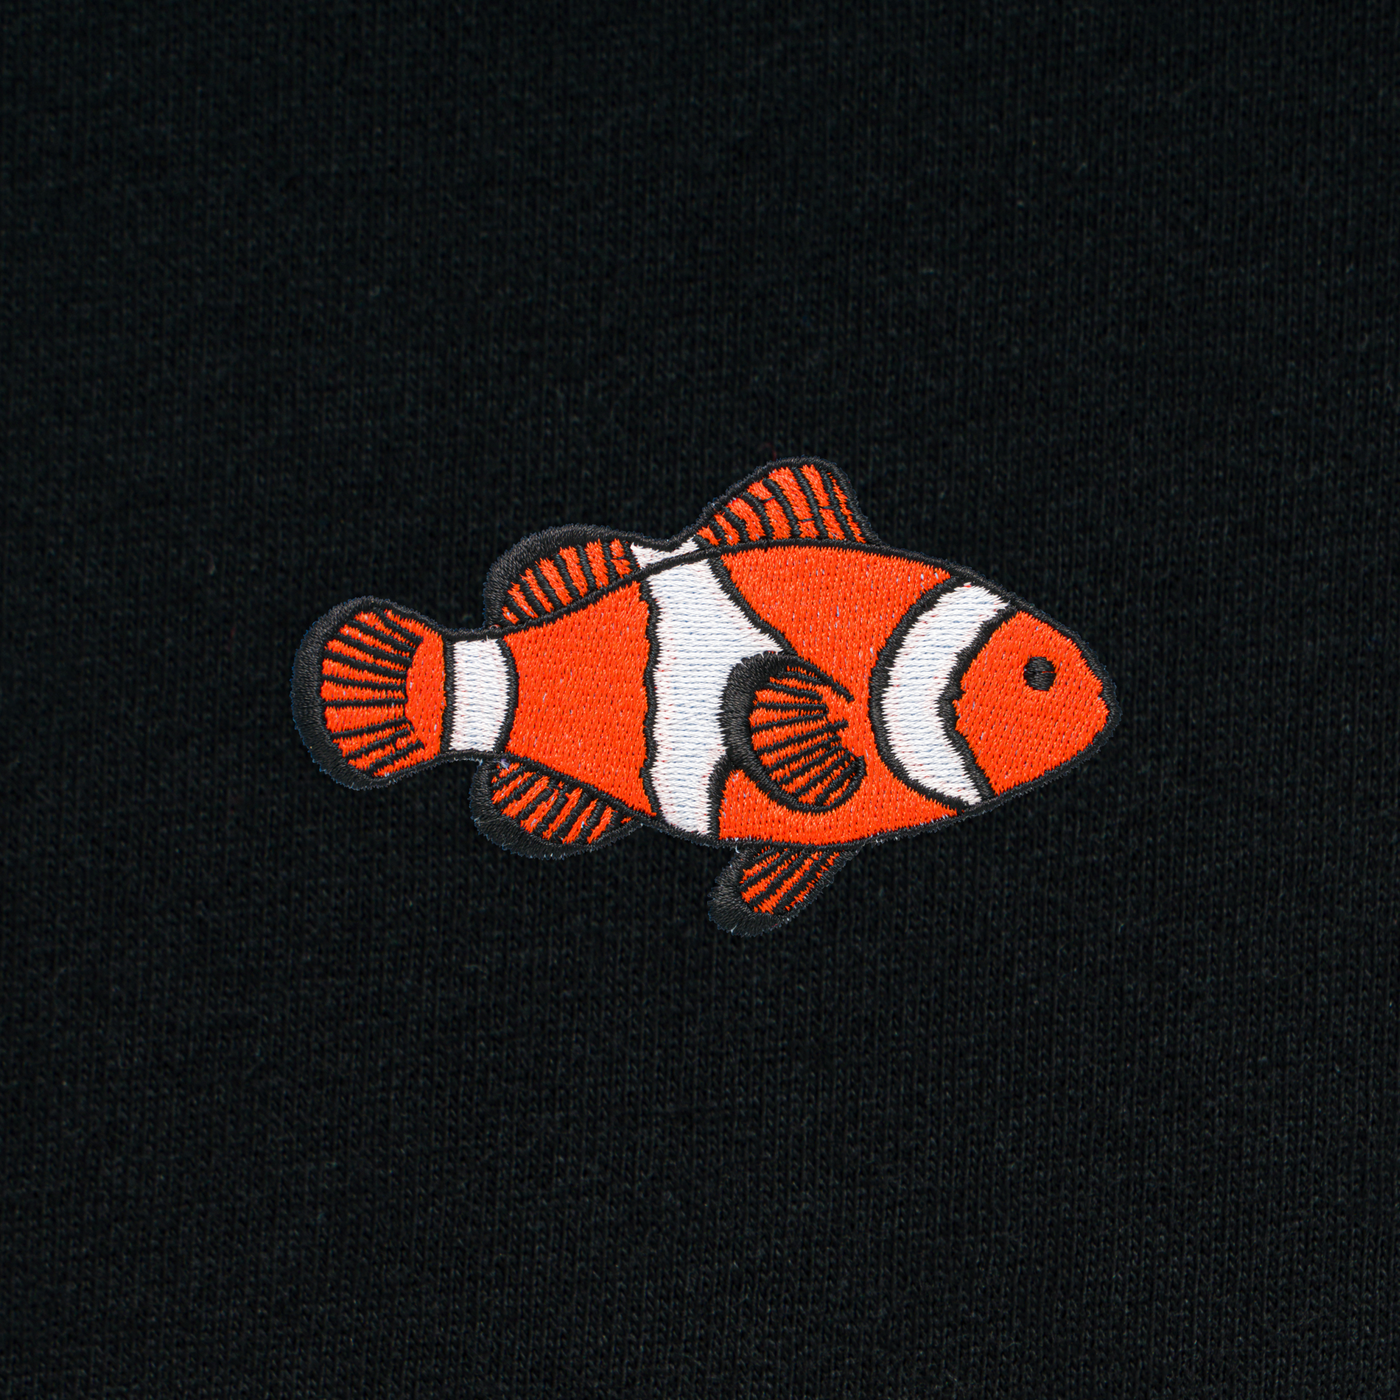 Bobby's Planet Kids Embroidered Clownfish T-Shirt from Seven Seas Fish Animals Collection in Black Color#color_black